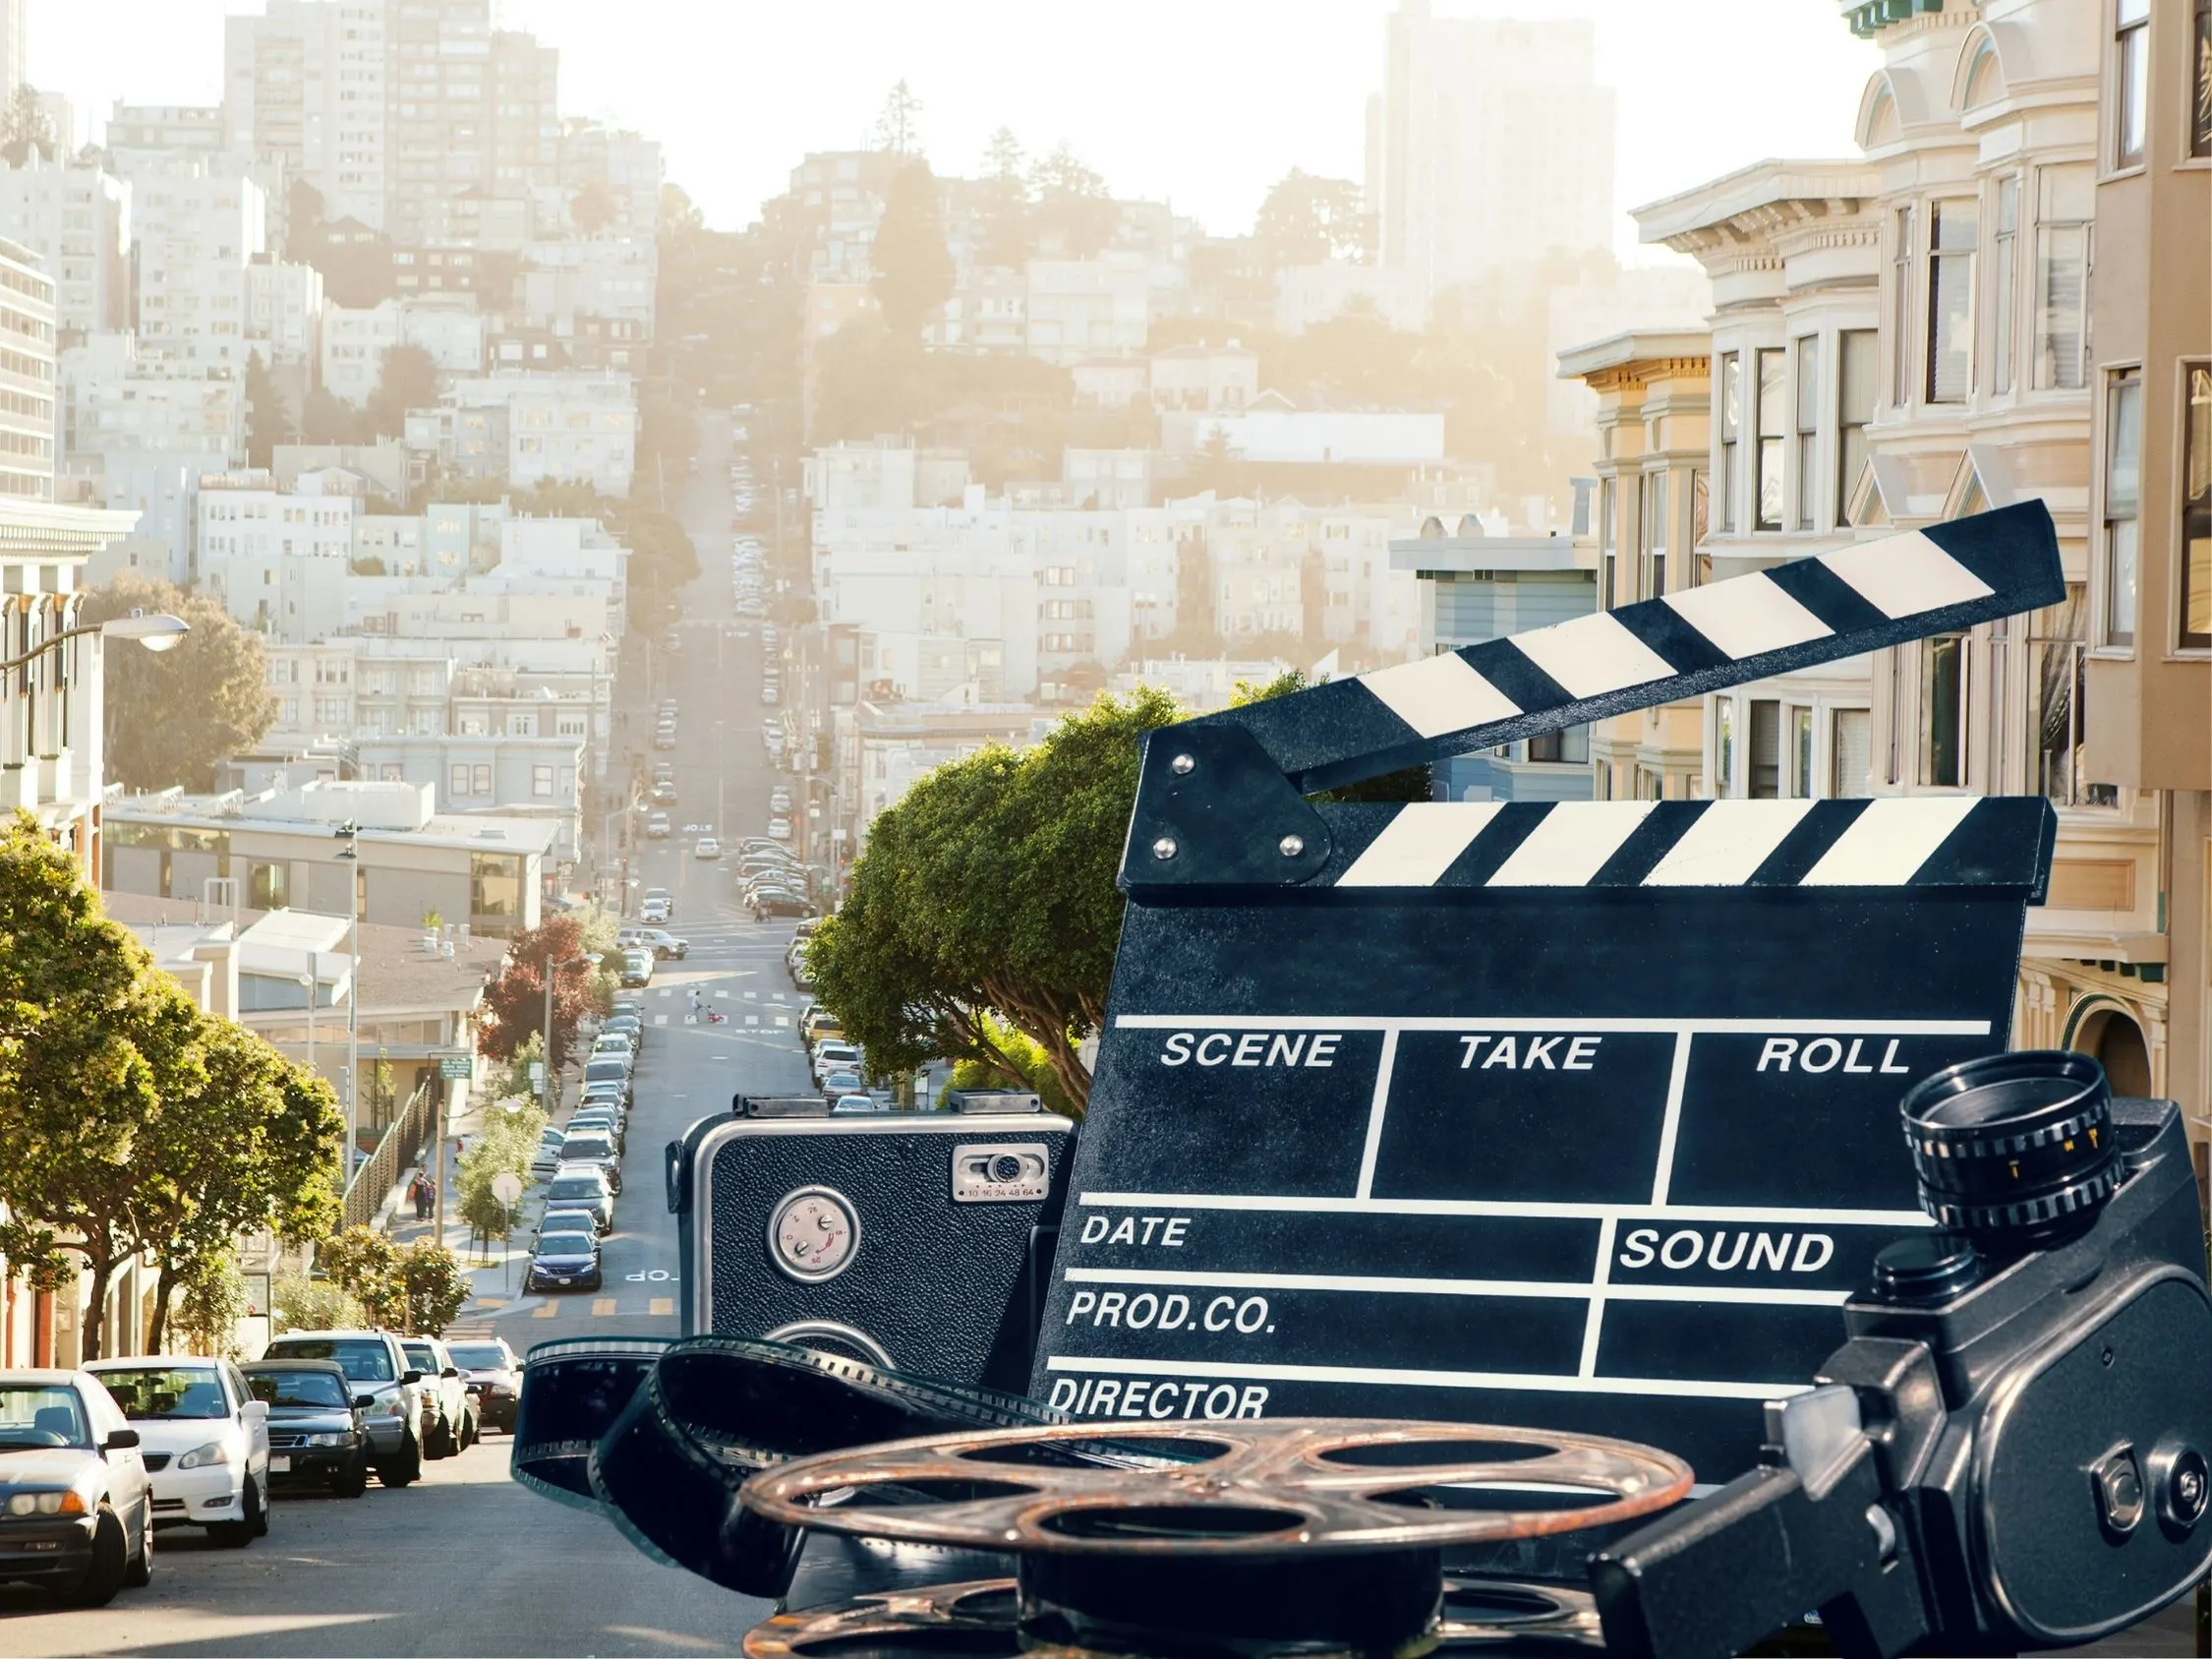 Extraordinary Movies Set In San Francisco That Will Inspire You To Visit!